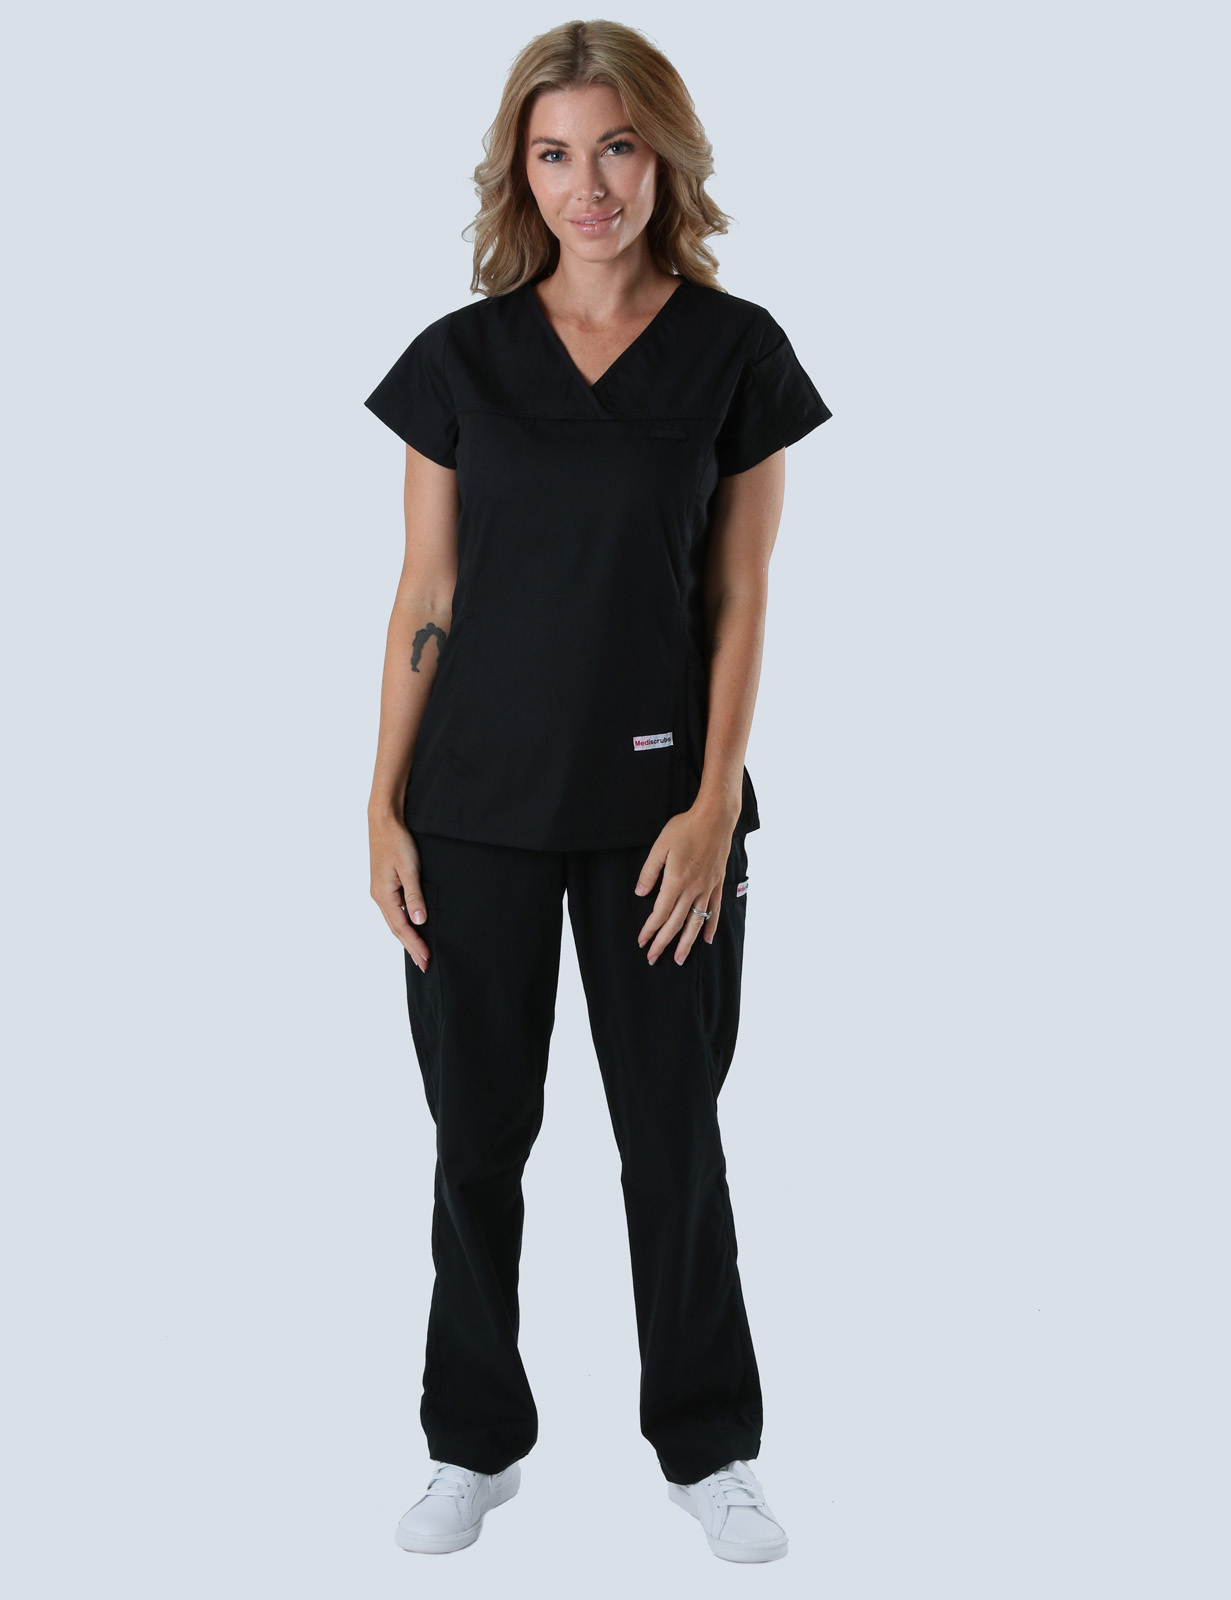 Women's Fit Solid Scrub Top - Black - 4X large